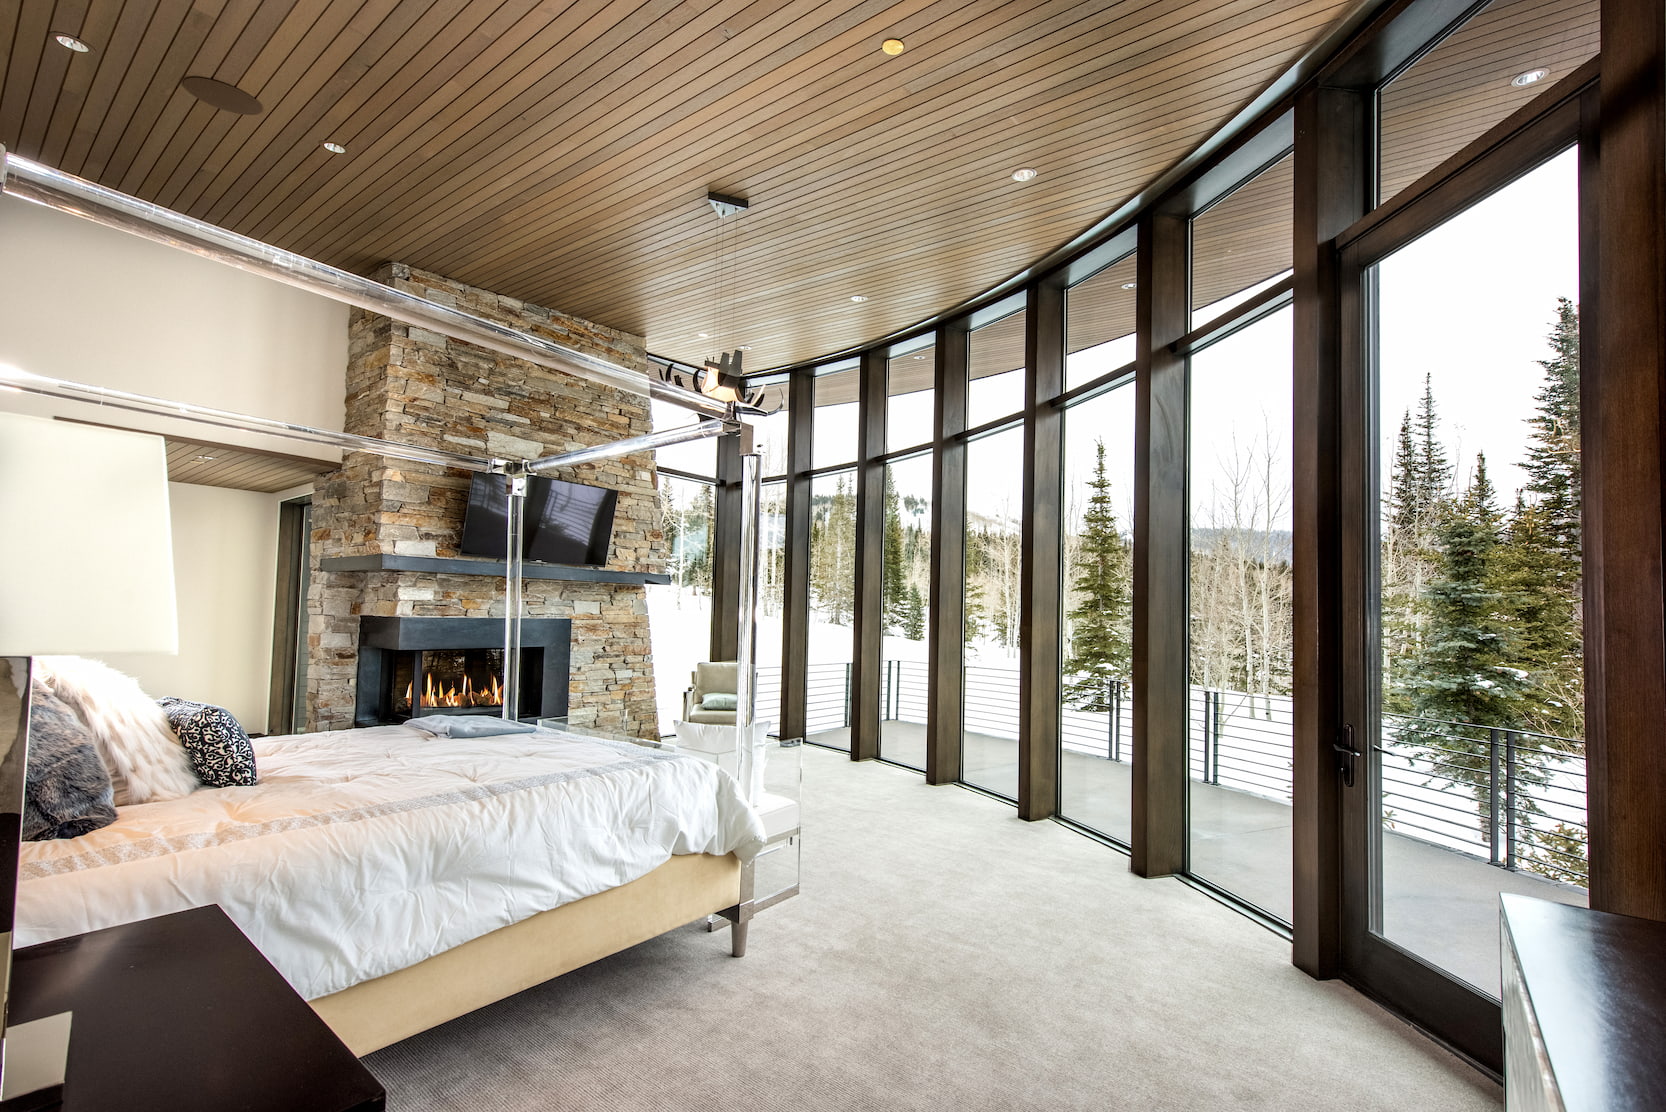 A bedroom with wood ceilings and a fireplace features a curved window wall with a hinged patio door.